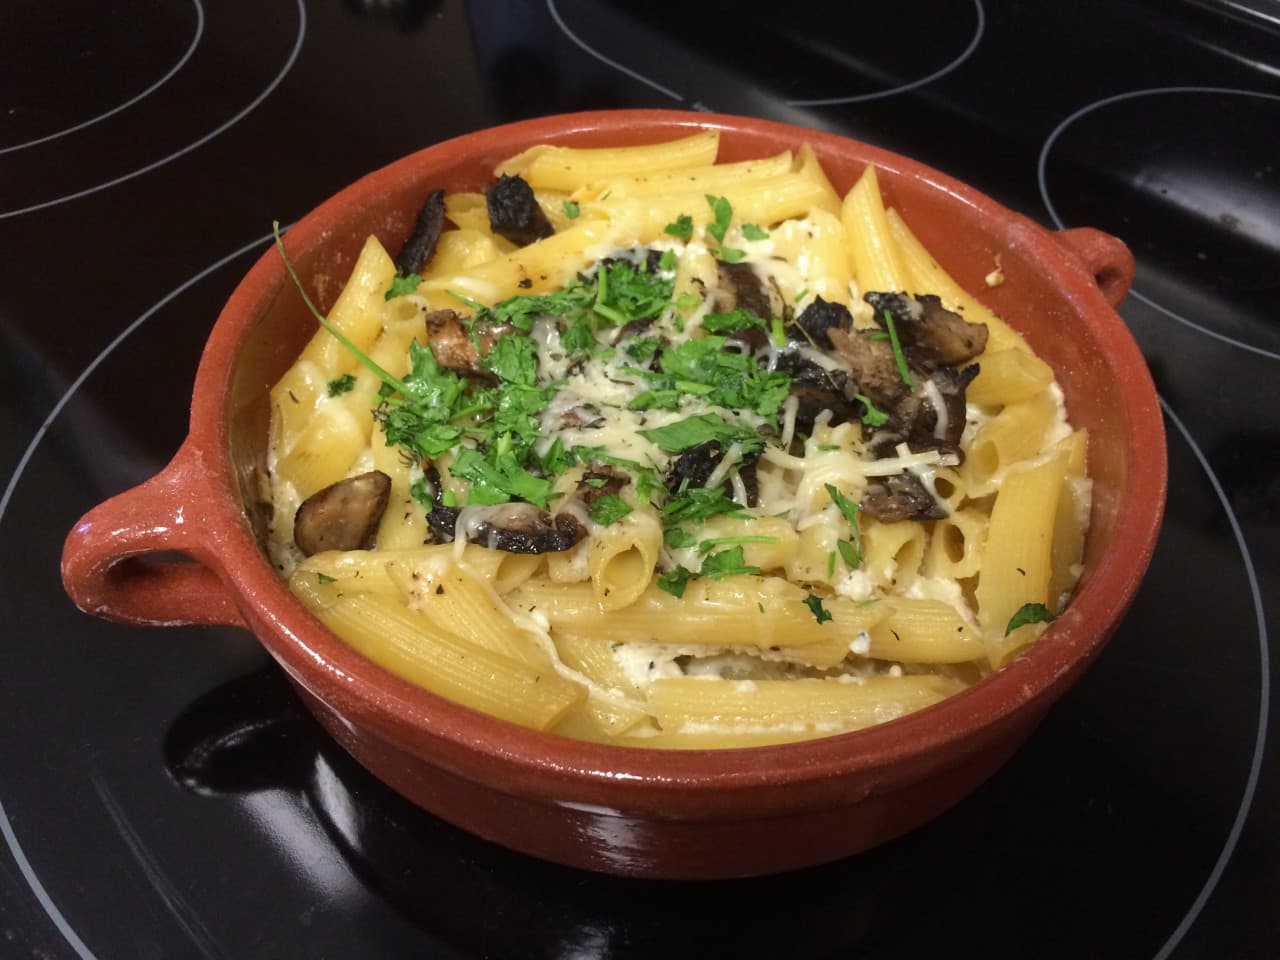 This baked penne with cheese sauce and sautéed mushrooms is Kathy Gunst's take on mac and cheese. (Rachel Rohr)